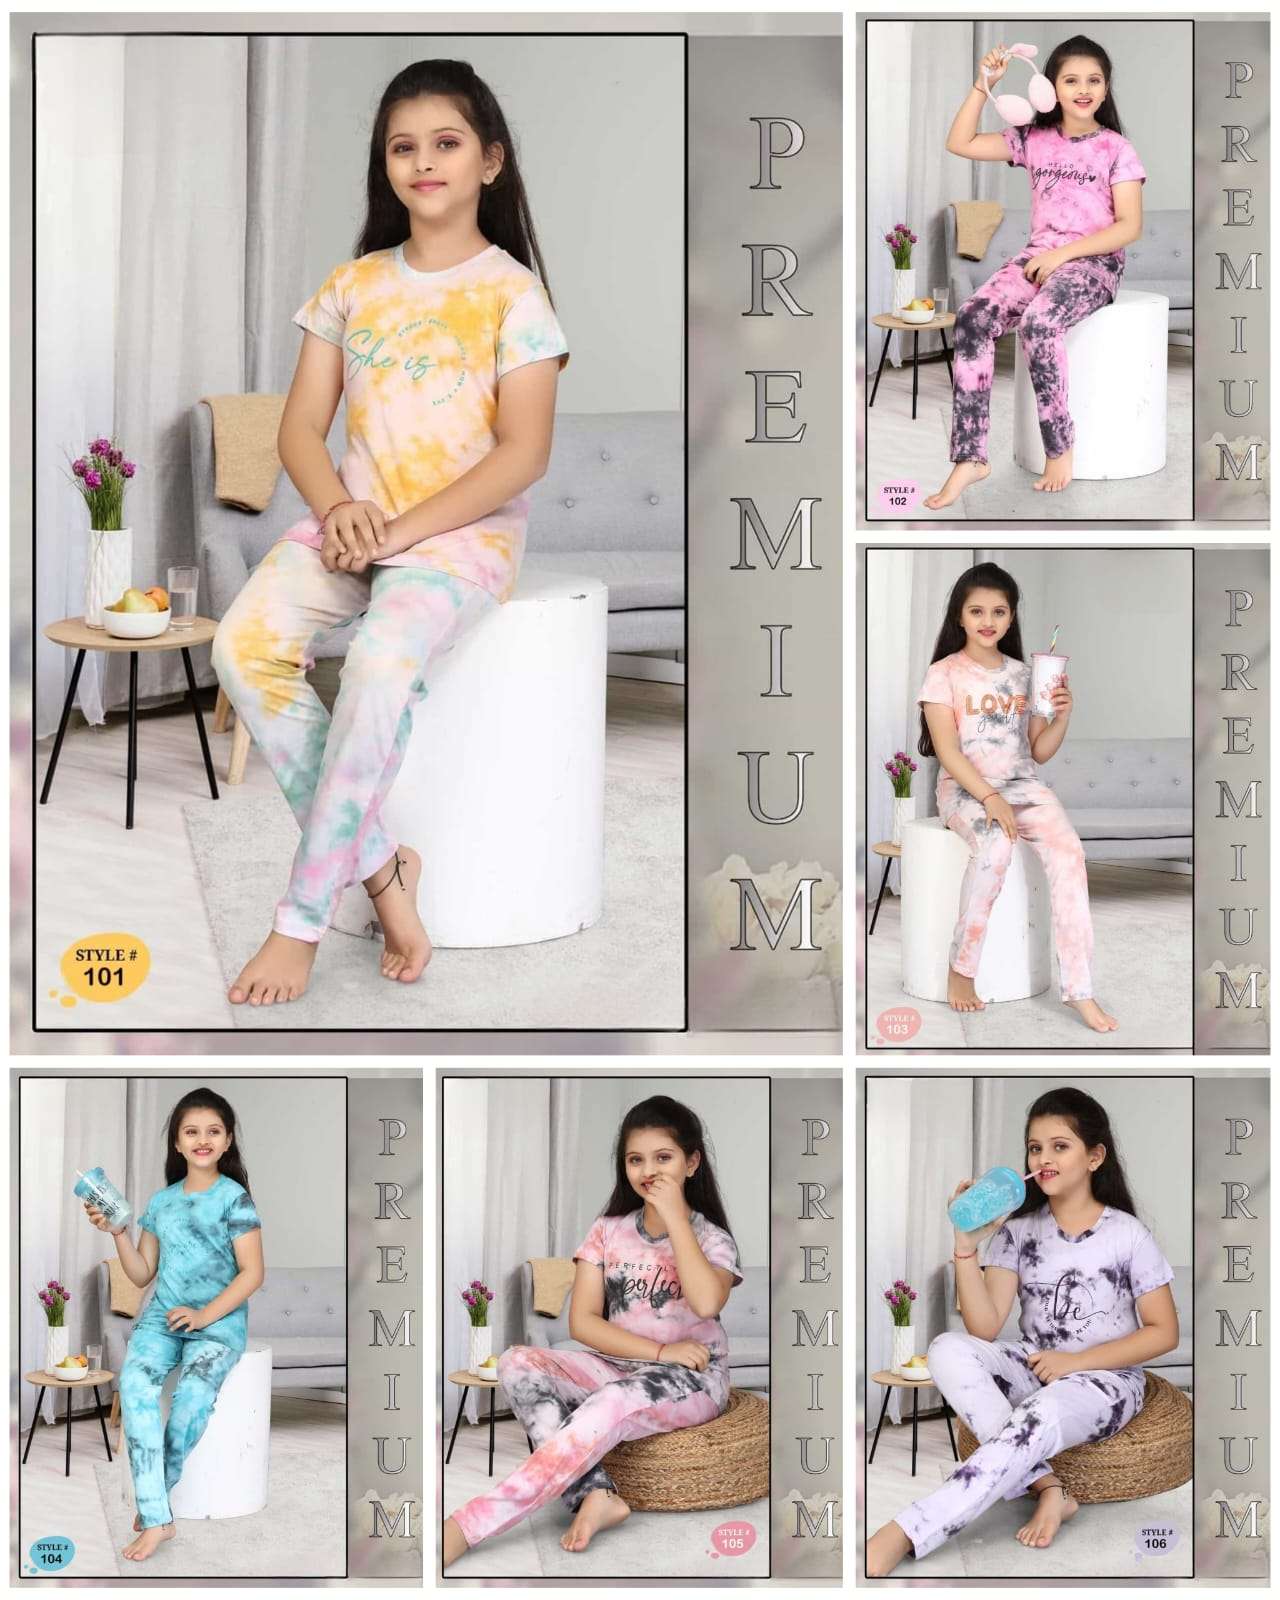 SLEEP WELL VOL 18 PREMIUM HOSIERY NIGHT SUIT BY S3 FOREVER BRAND WHOLESALR AND DELER